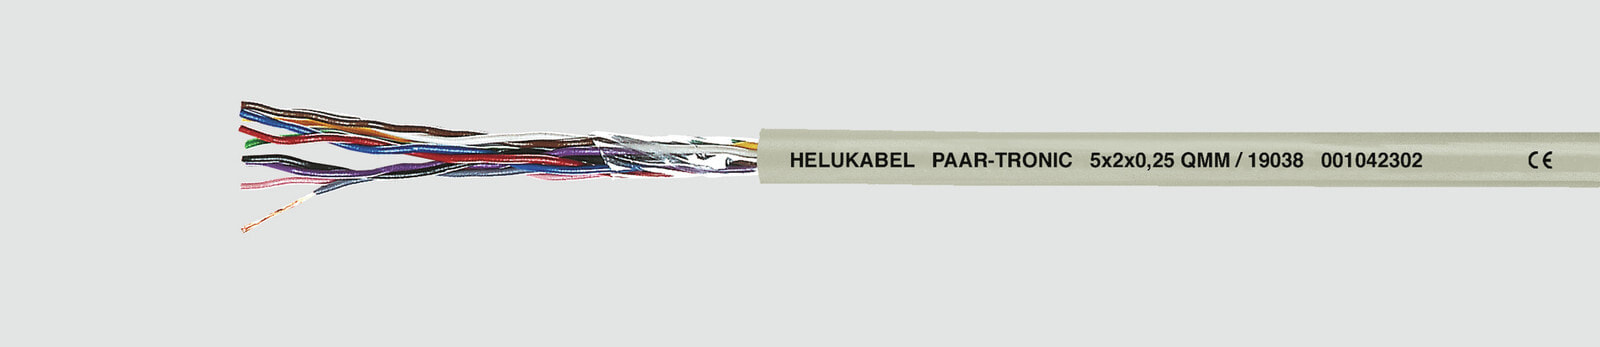 Helukabel PAAR-TRONIC - High voltage cable - Polyvinyl chloride (PVC) - Polyvinyl chloride (PVC) - Tinned copper - 0.14 mm² - 22 kg/km